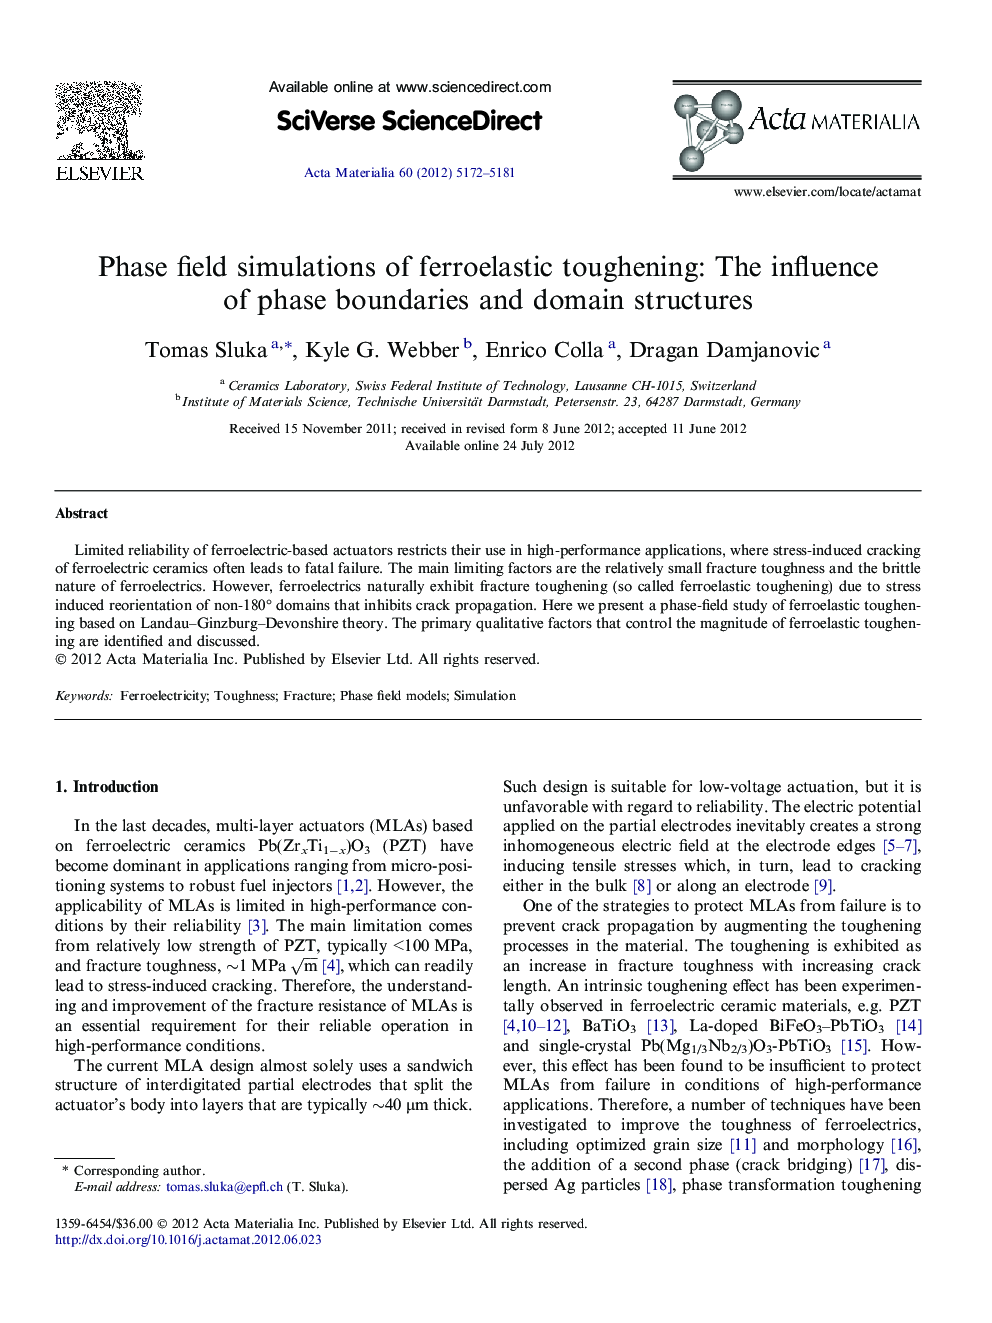 Phase field simulations of ferroelastic toughening: The influence of phase boundaries and domain structures